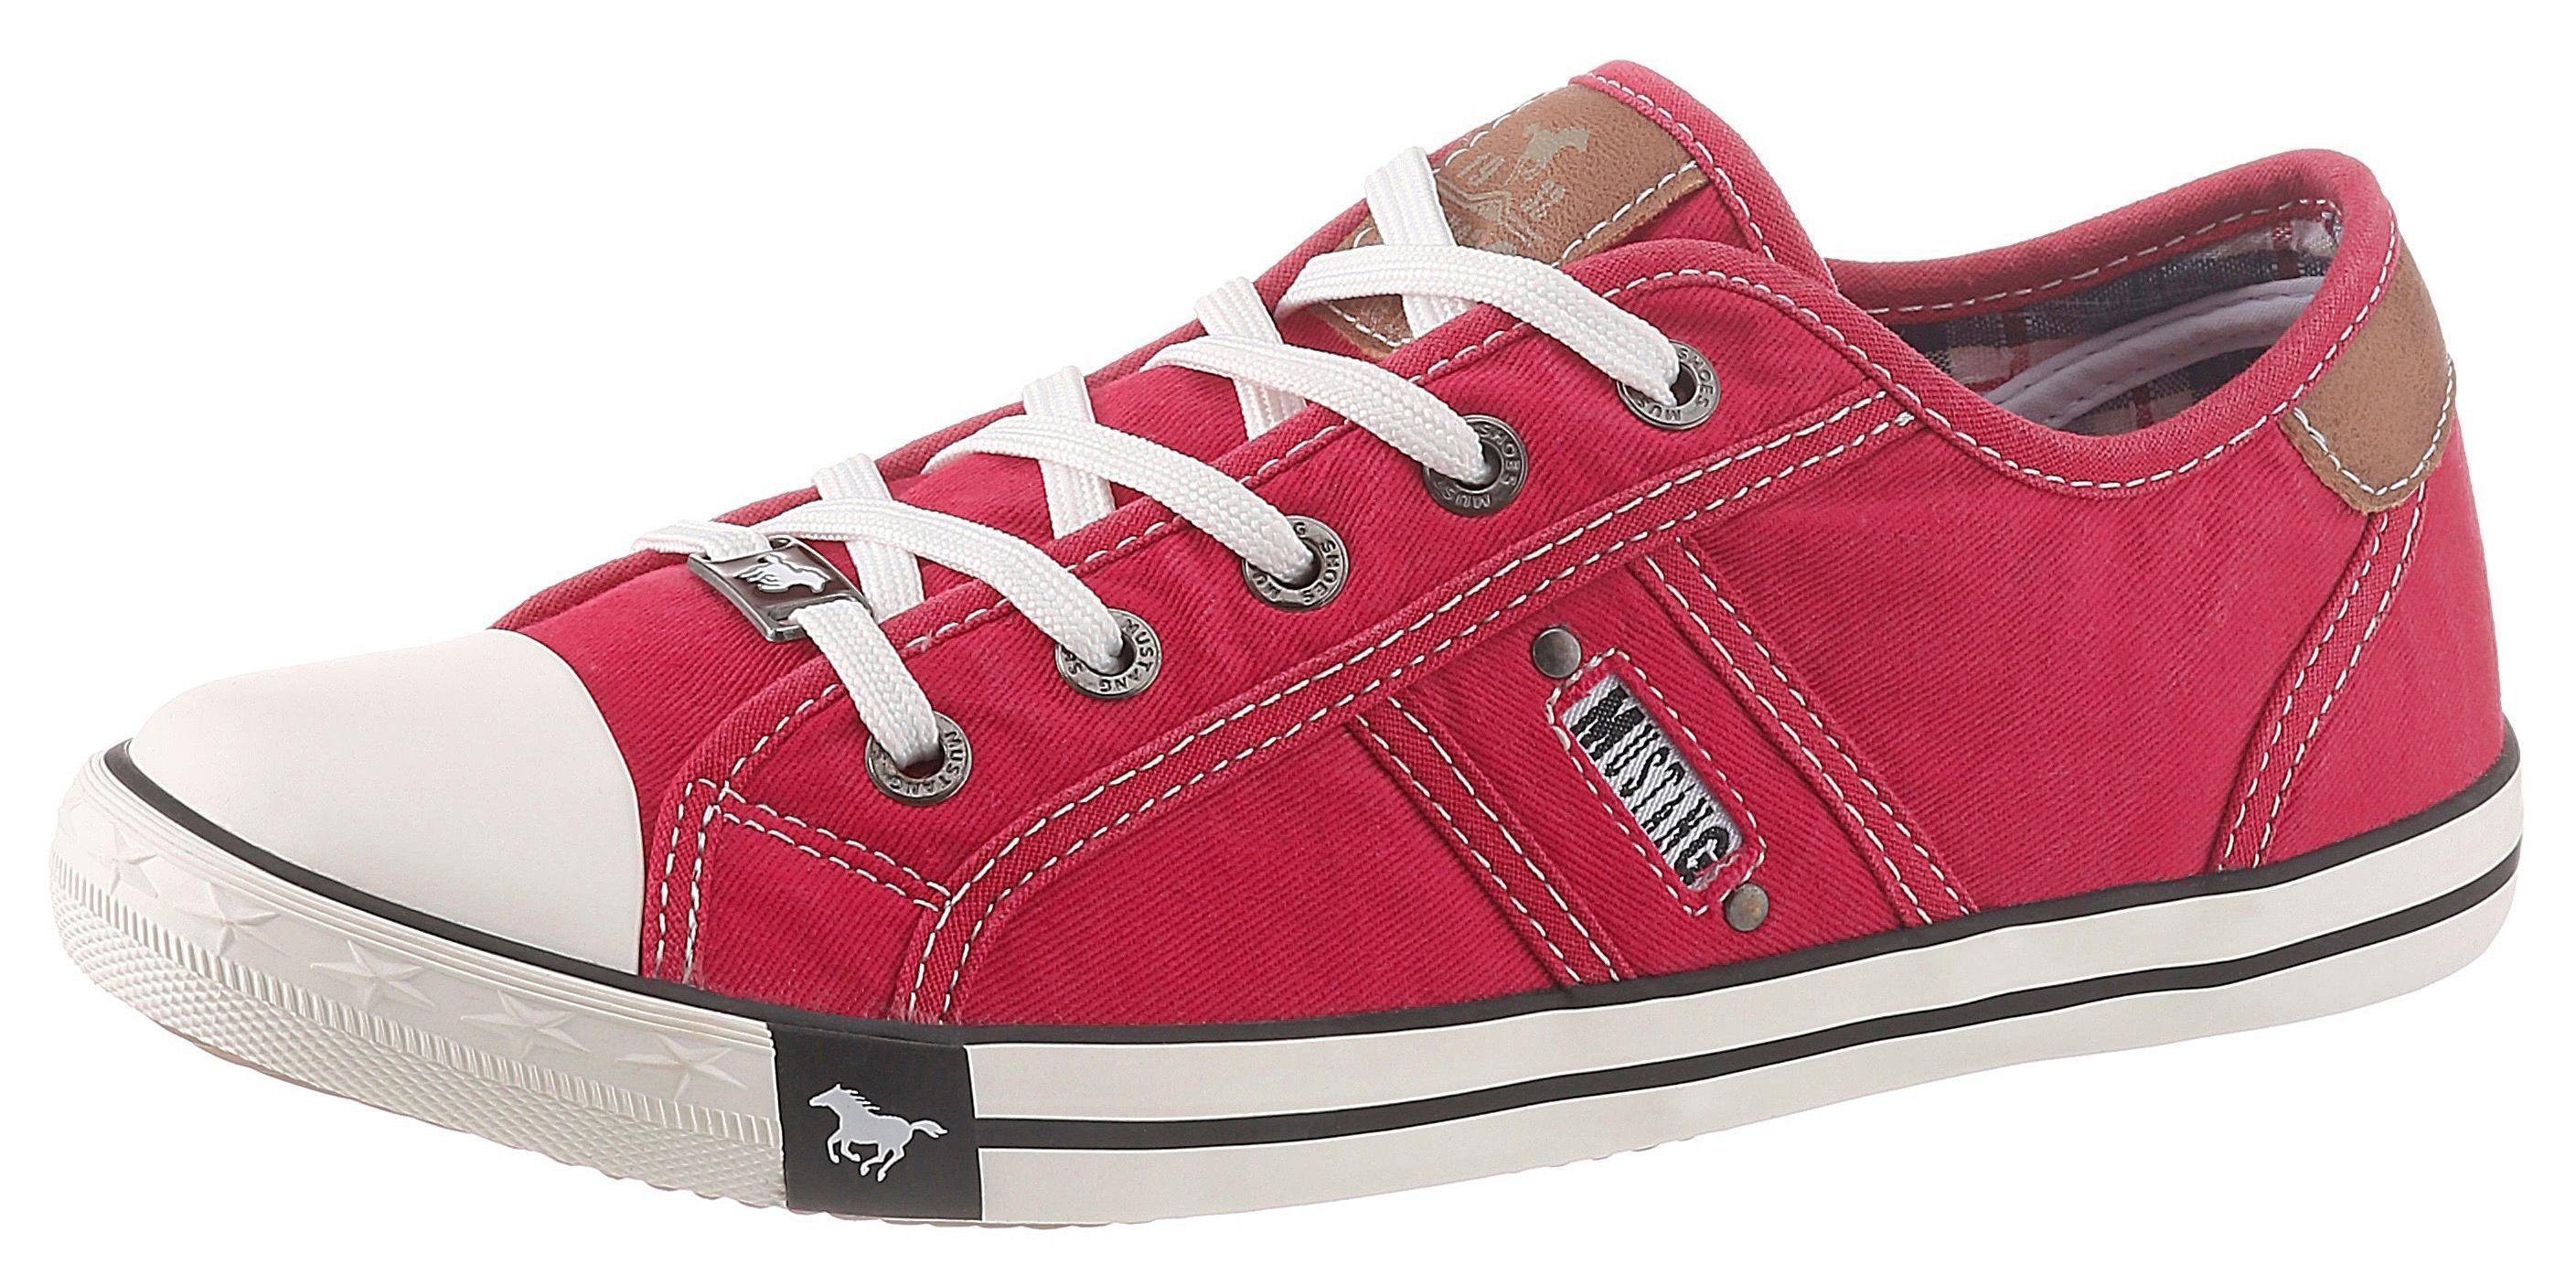 Markenlabel Shoes Sneaker Mustang Mustang mit rot